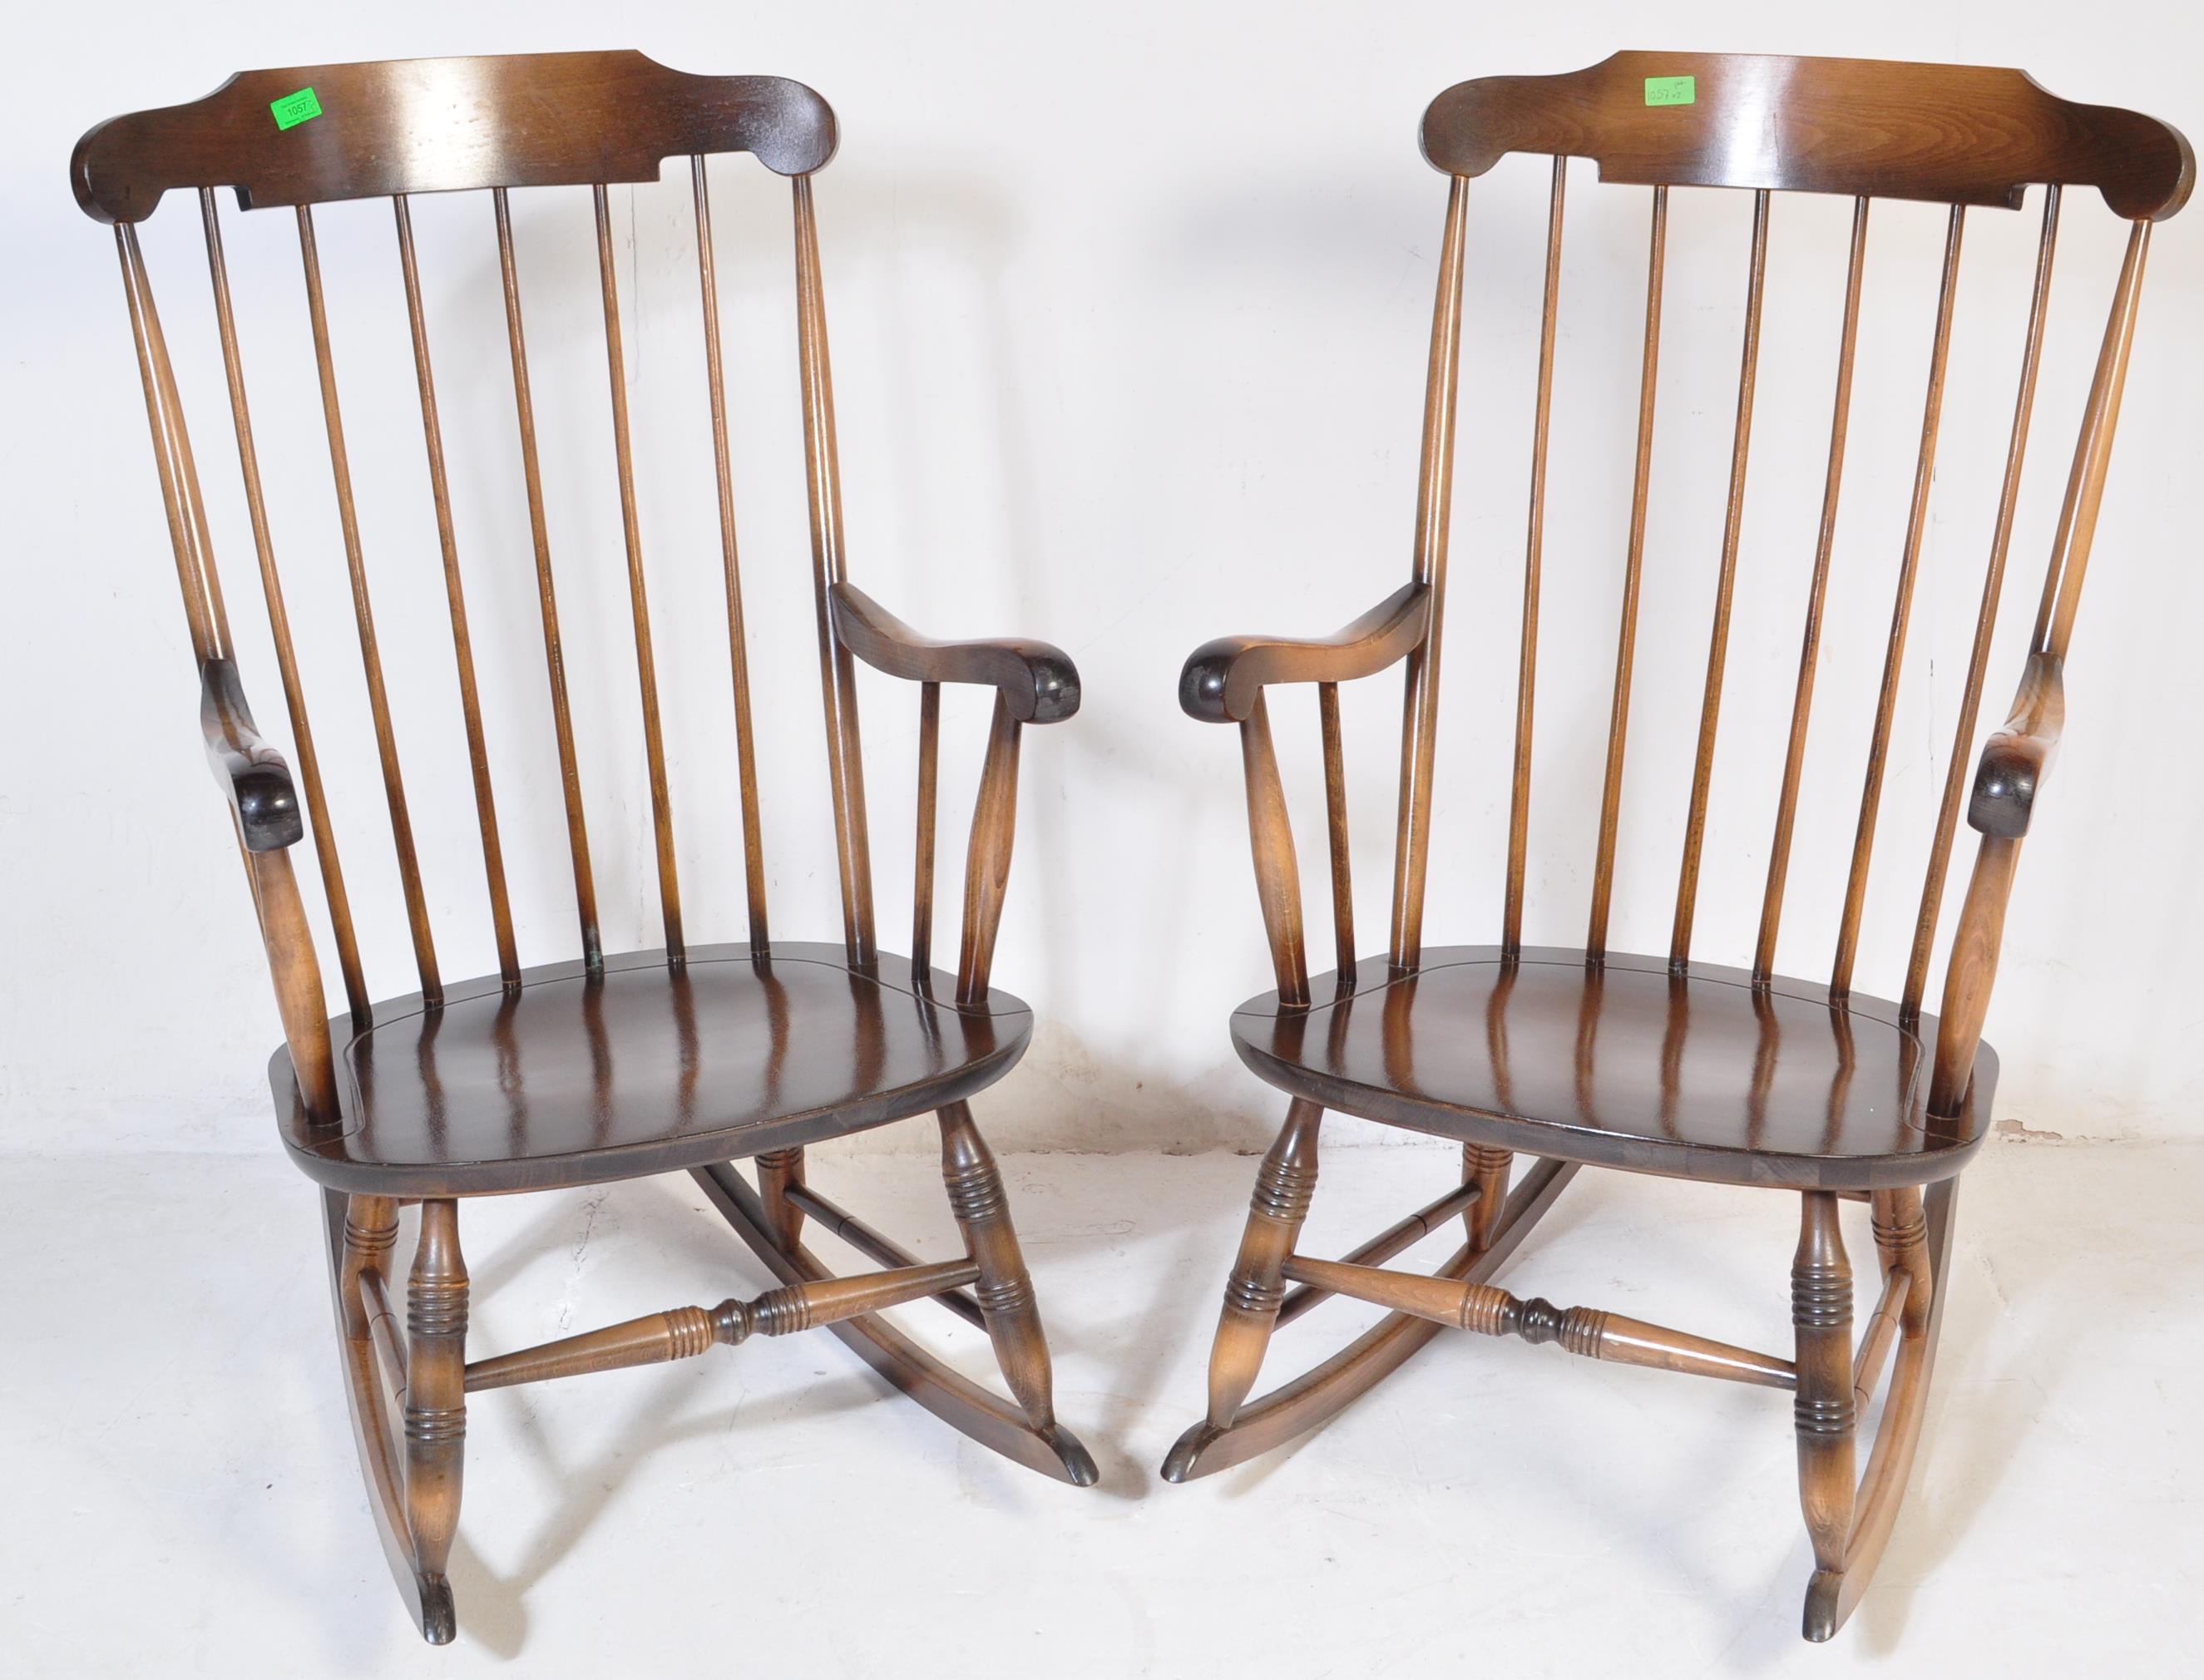 PAIR OF VICTORIAN STYLE ROCKING CHAIRS WINDSOR ARMCHAIRS - Image 2 of 5